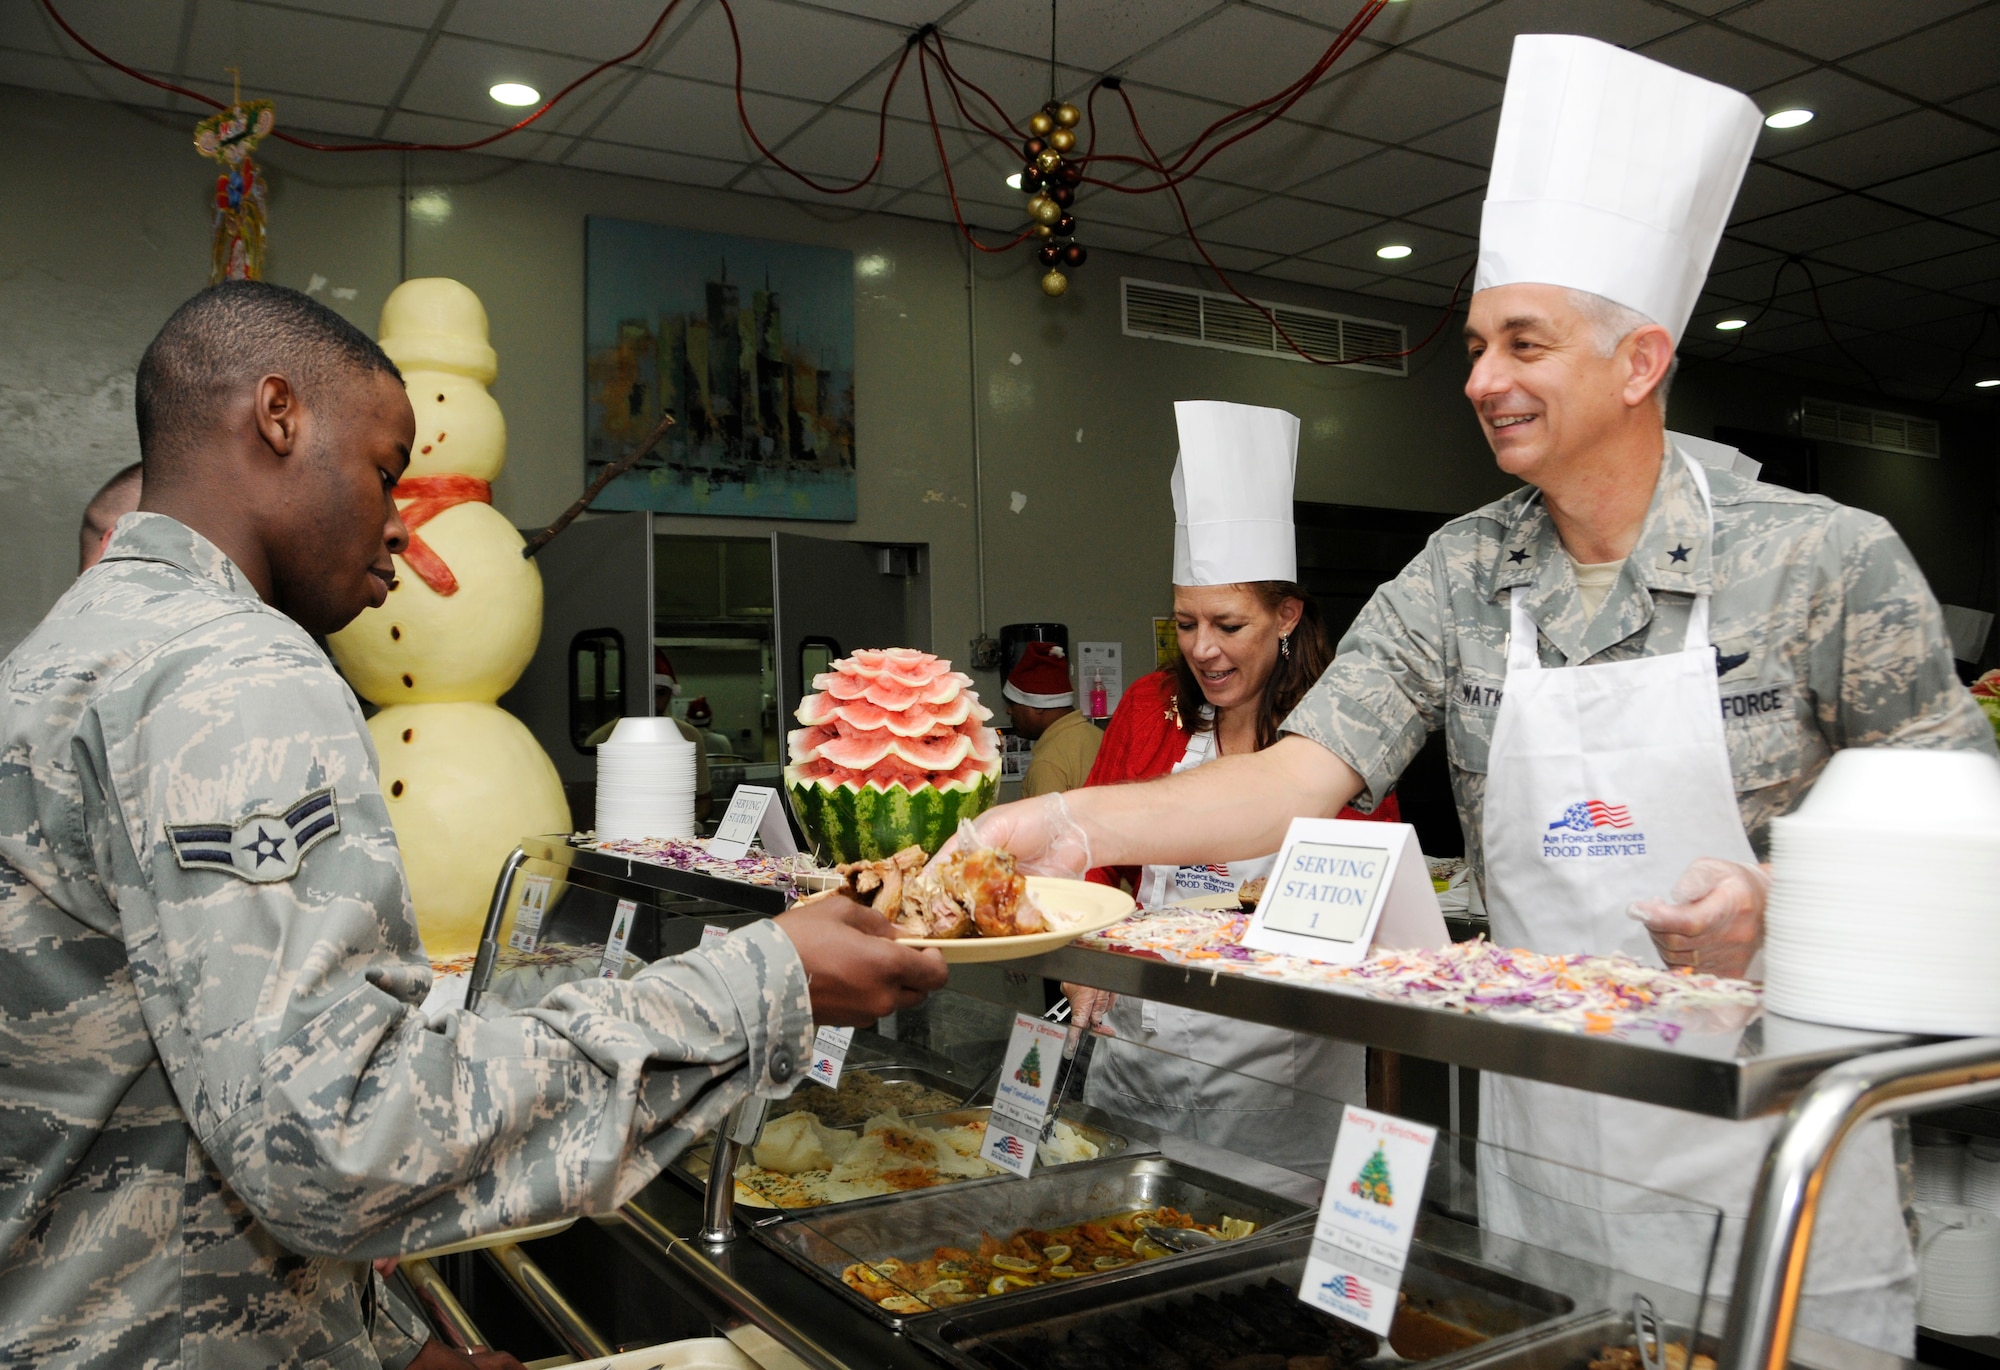 Brig. Gen. Roger H. Watkins and his wife Leslie serve Christmas Day meals to service members at the 379th Air Expeditionary Wing in Southwest Asia, Dec. 25, 2013. Senior leadership volunteered throughout the day to serve meals to service members at the three base dining facilities.  Watkins is the 379th AEW commander and hails here from Fort Worth, Texas. (U.S. Air Force photo/Senior Airman Hannah Landeros)